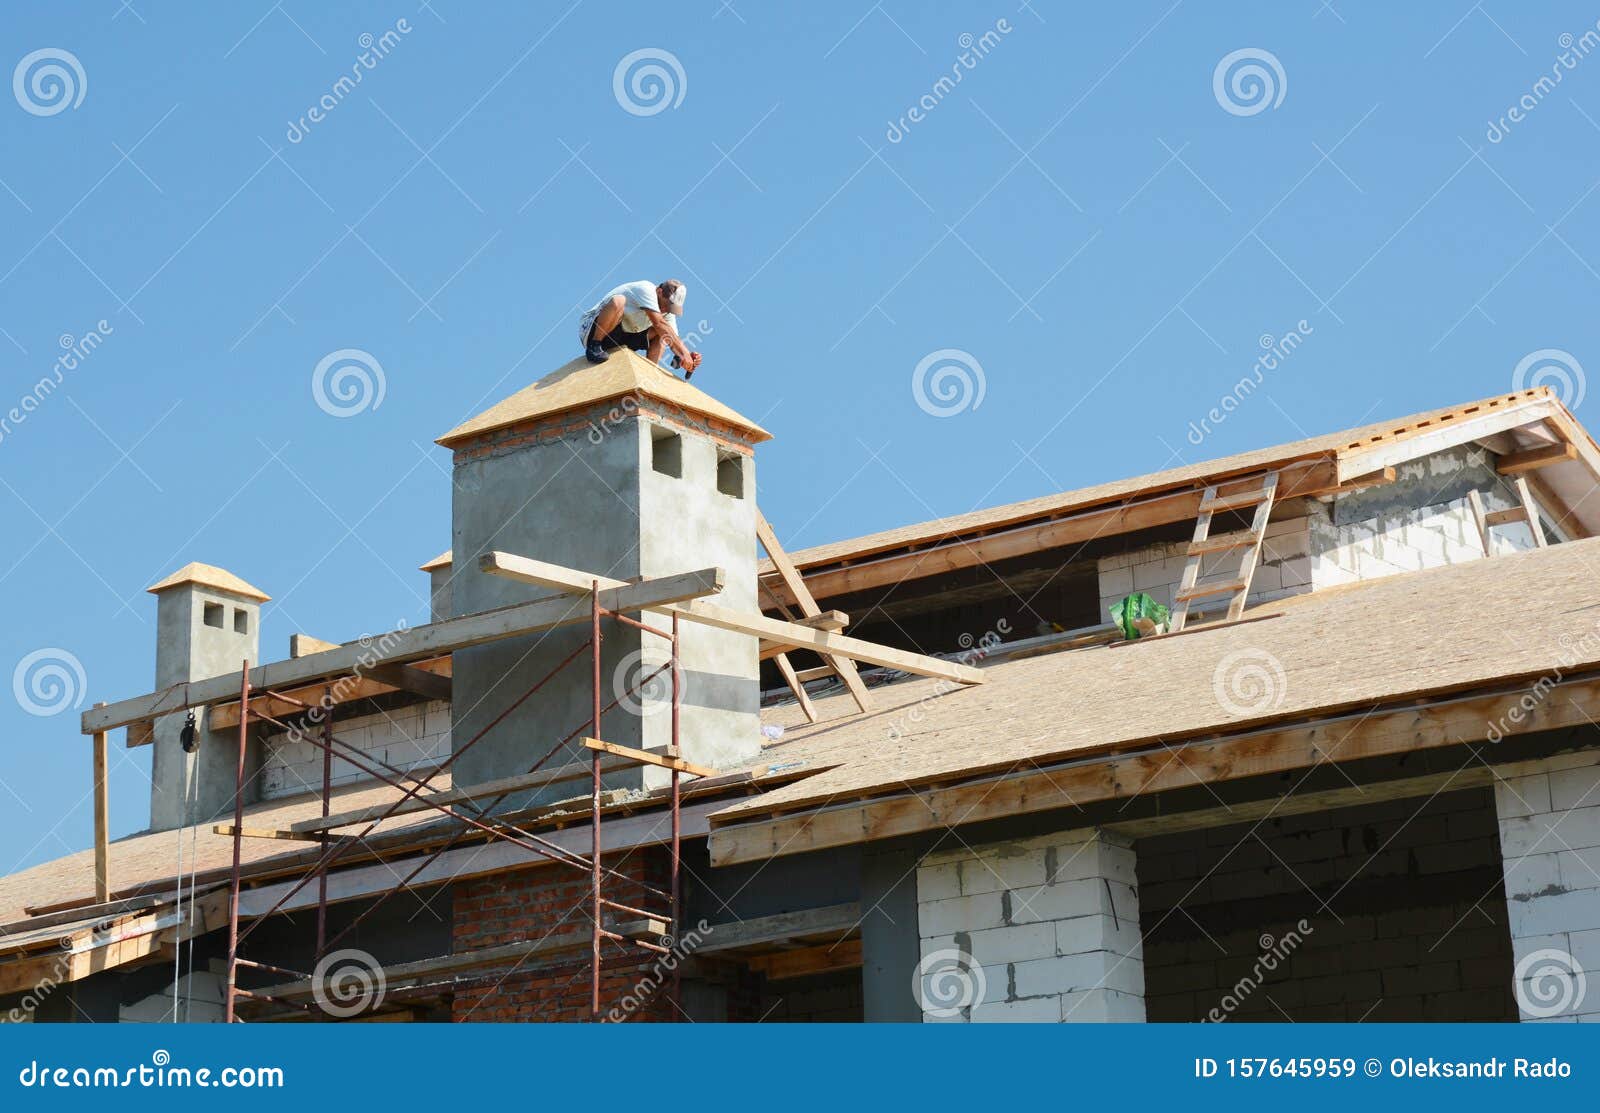 roofer contractors laying asphalt shingles on the house roof top. house roofing constuction with asphalt shingles